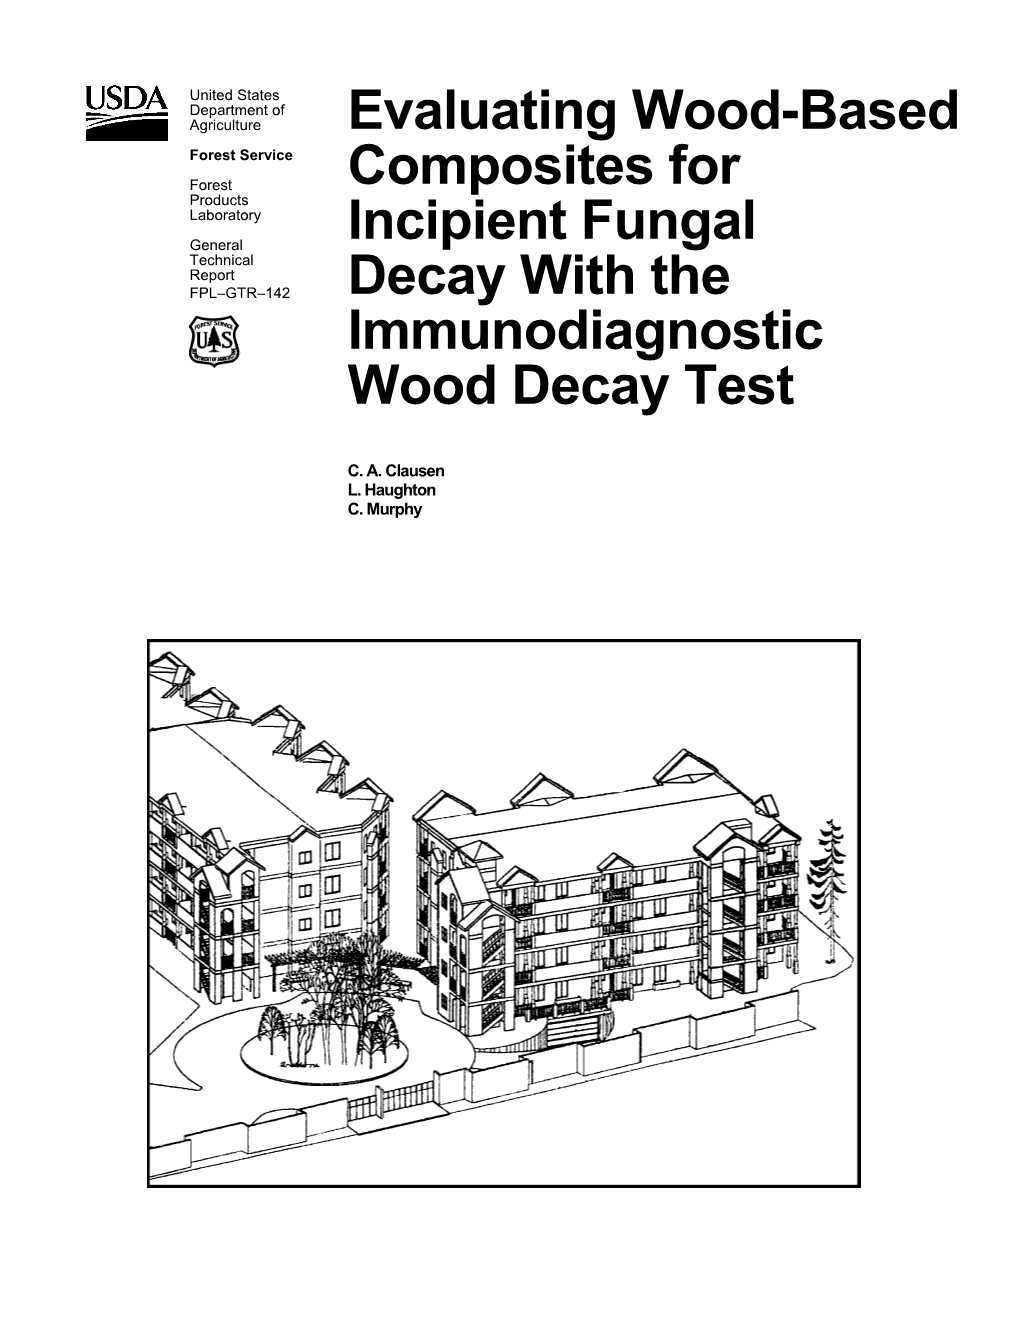 Evaluating Wood-Based Composites for Incipient Fungal Decay with the Immunodiagnostic Wood Decay Test